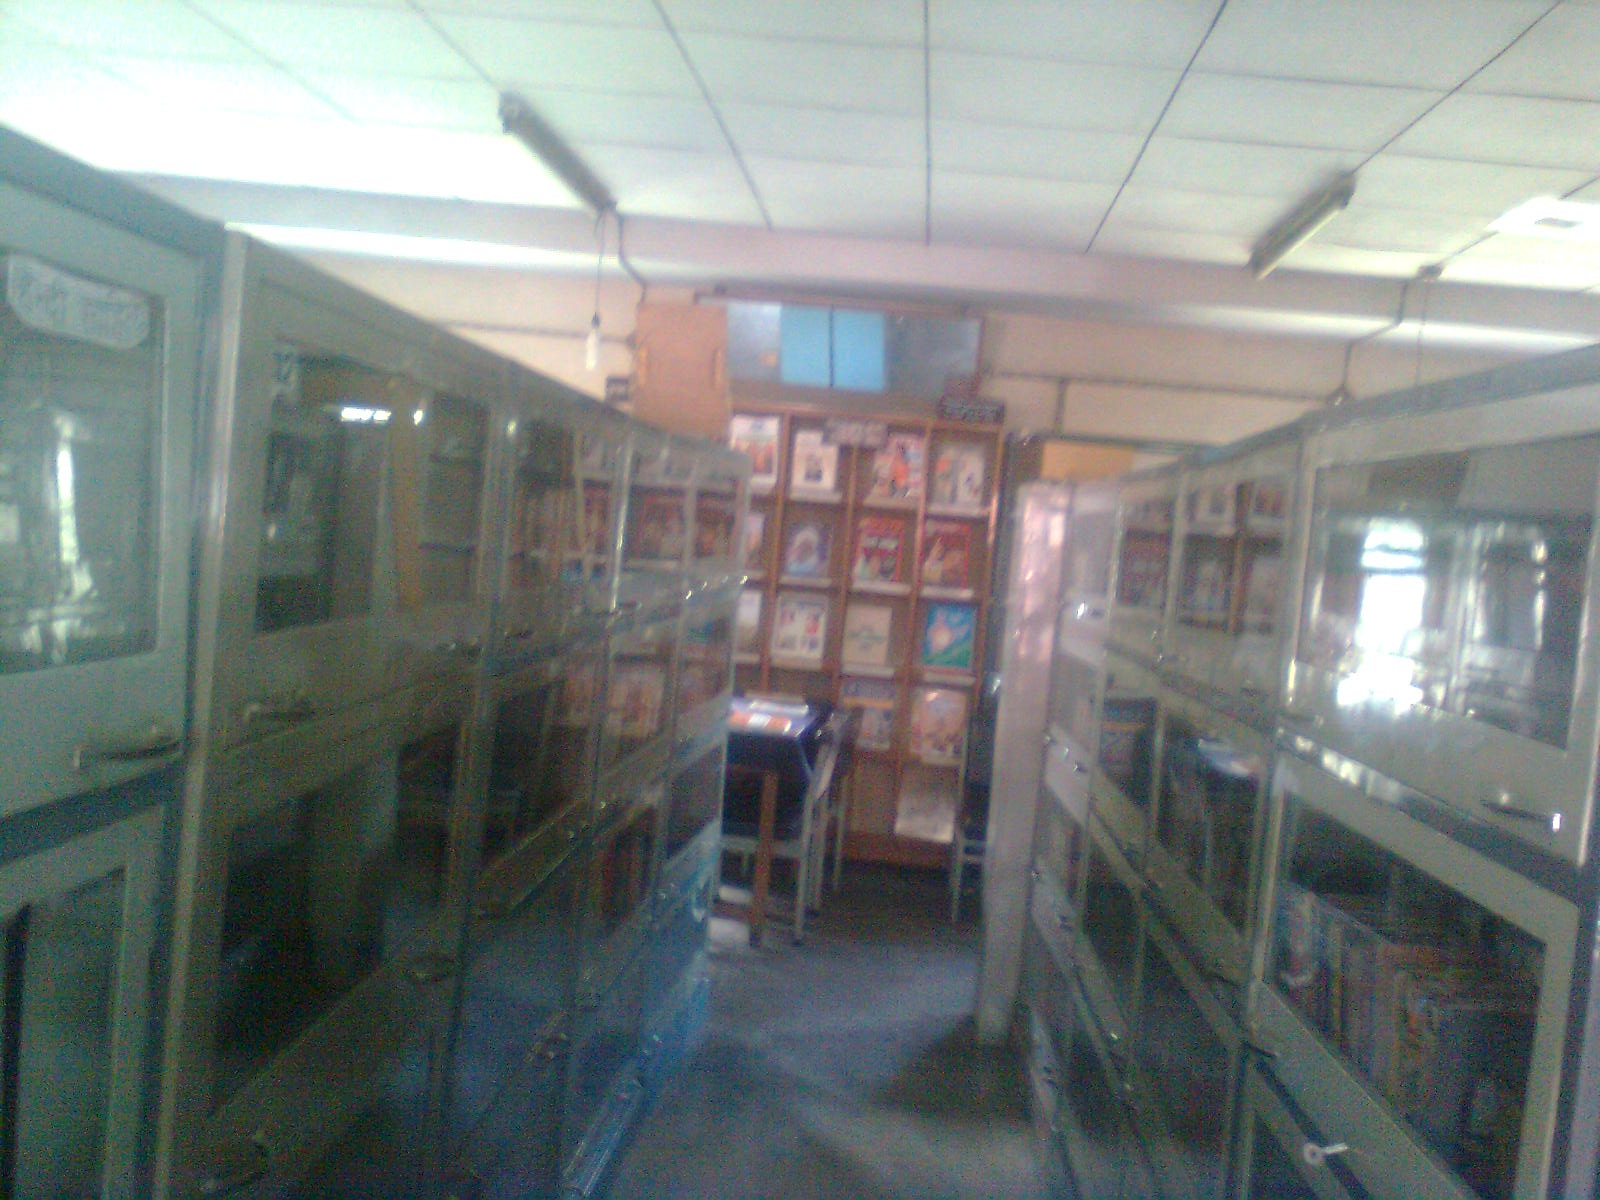 District Library, Keylong (HP)